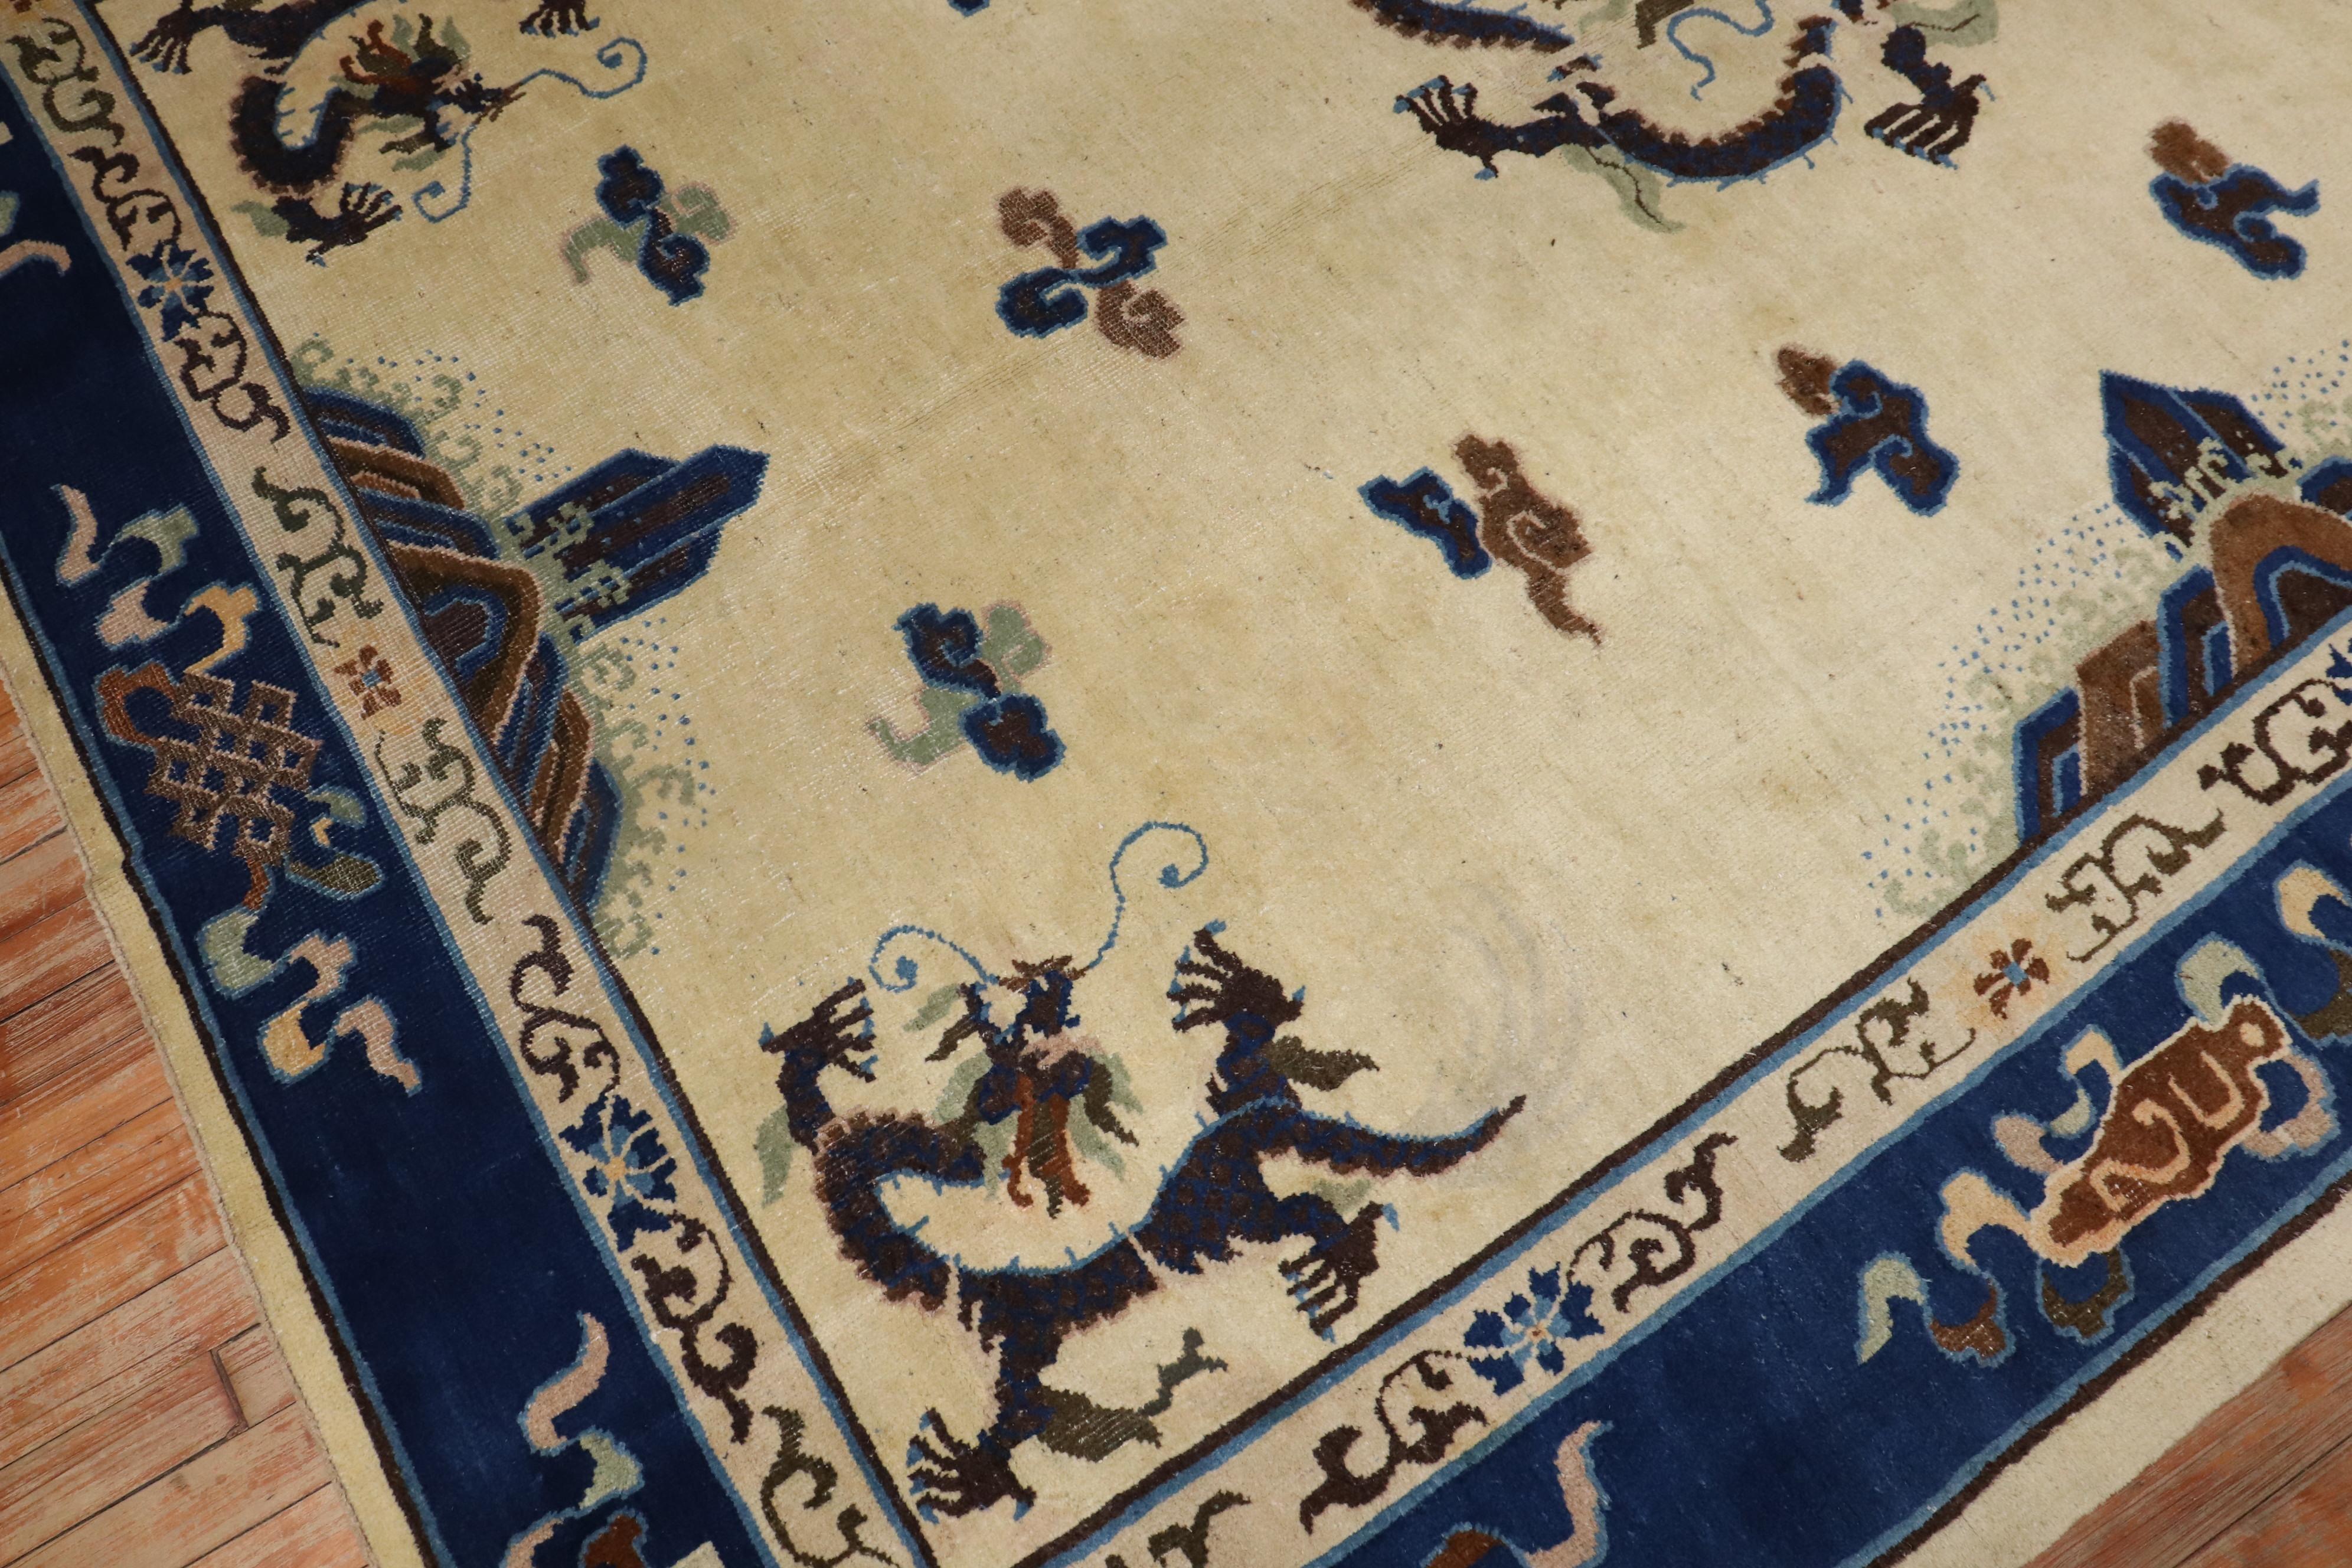 An early 20th century Chinese Peking Dragon motif rug with a spacious open field design on an ivory ground

Measures: 7'3'' x 9'7''

Chinese dragons are an important and powerful symbol in the eastern world and are sometimes find in Chinese